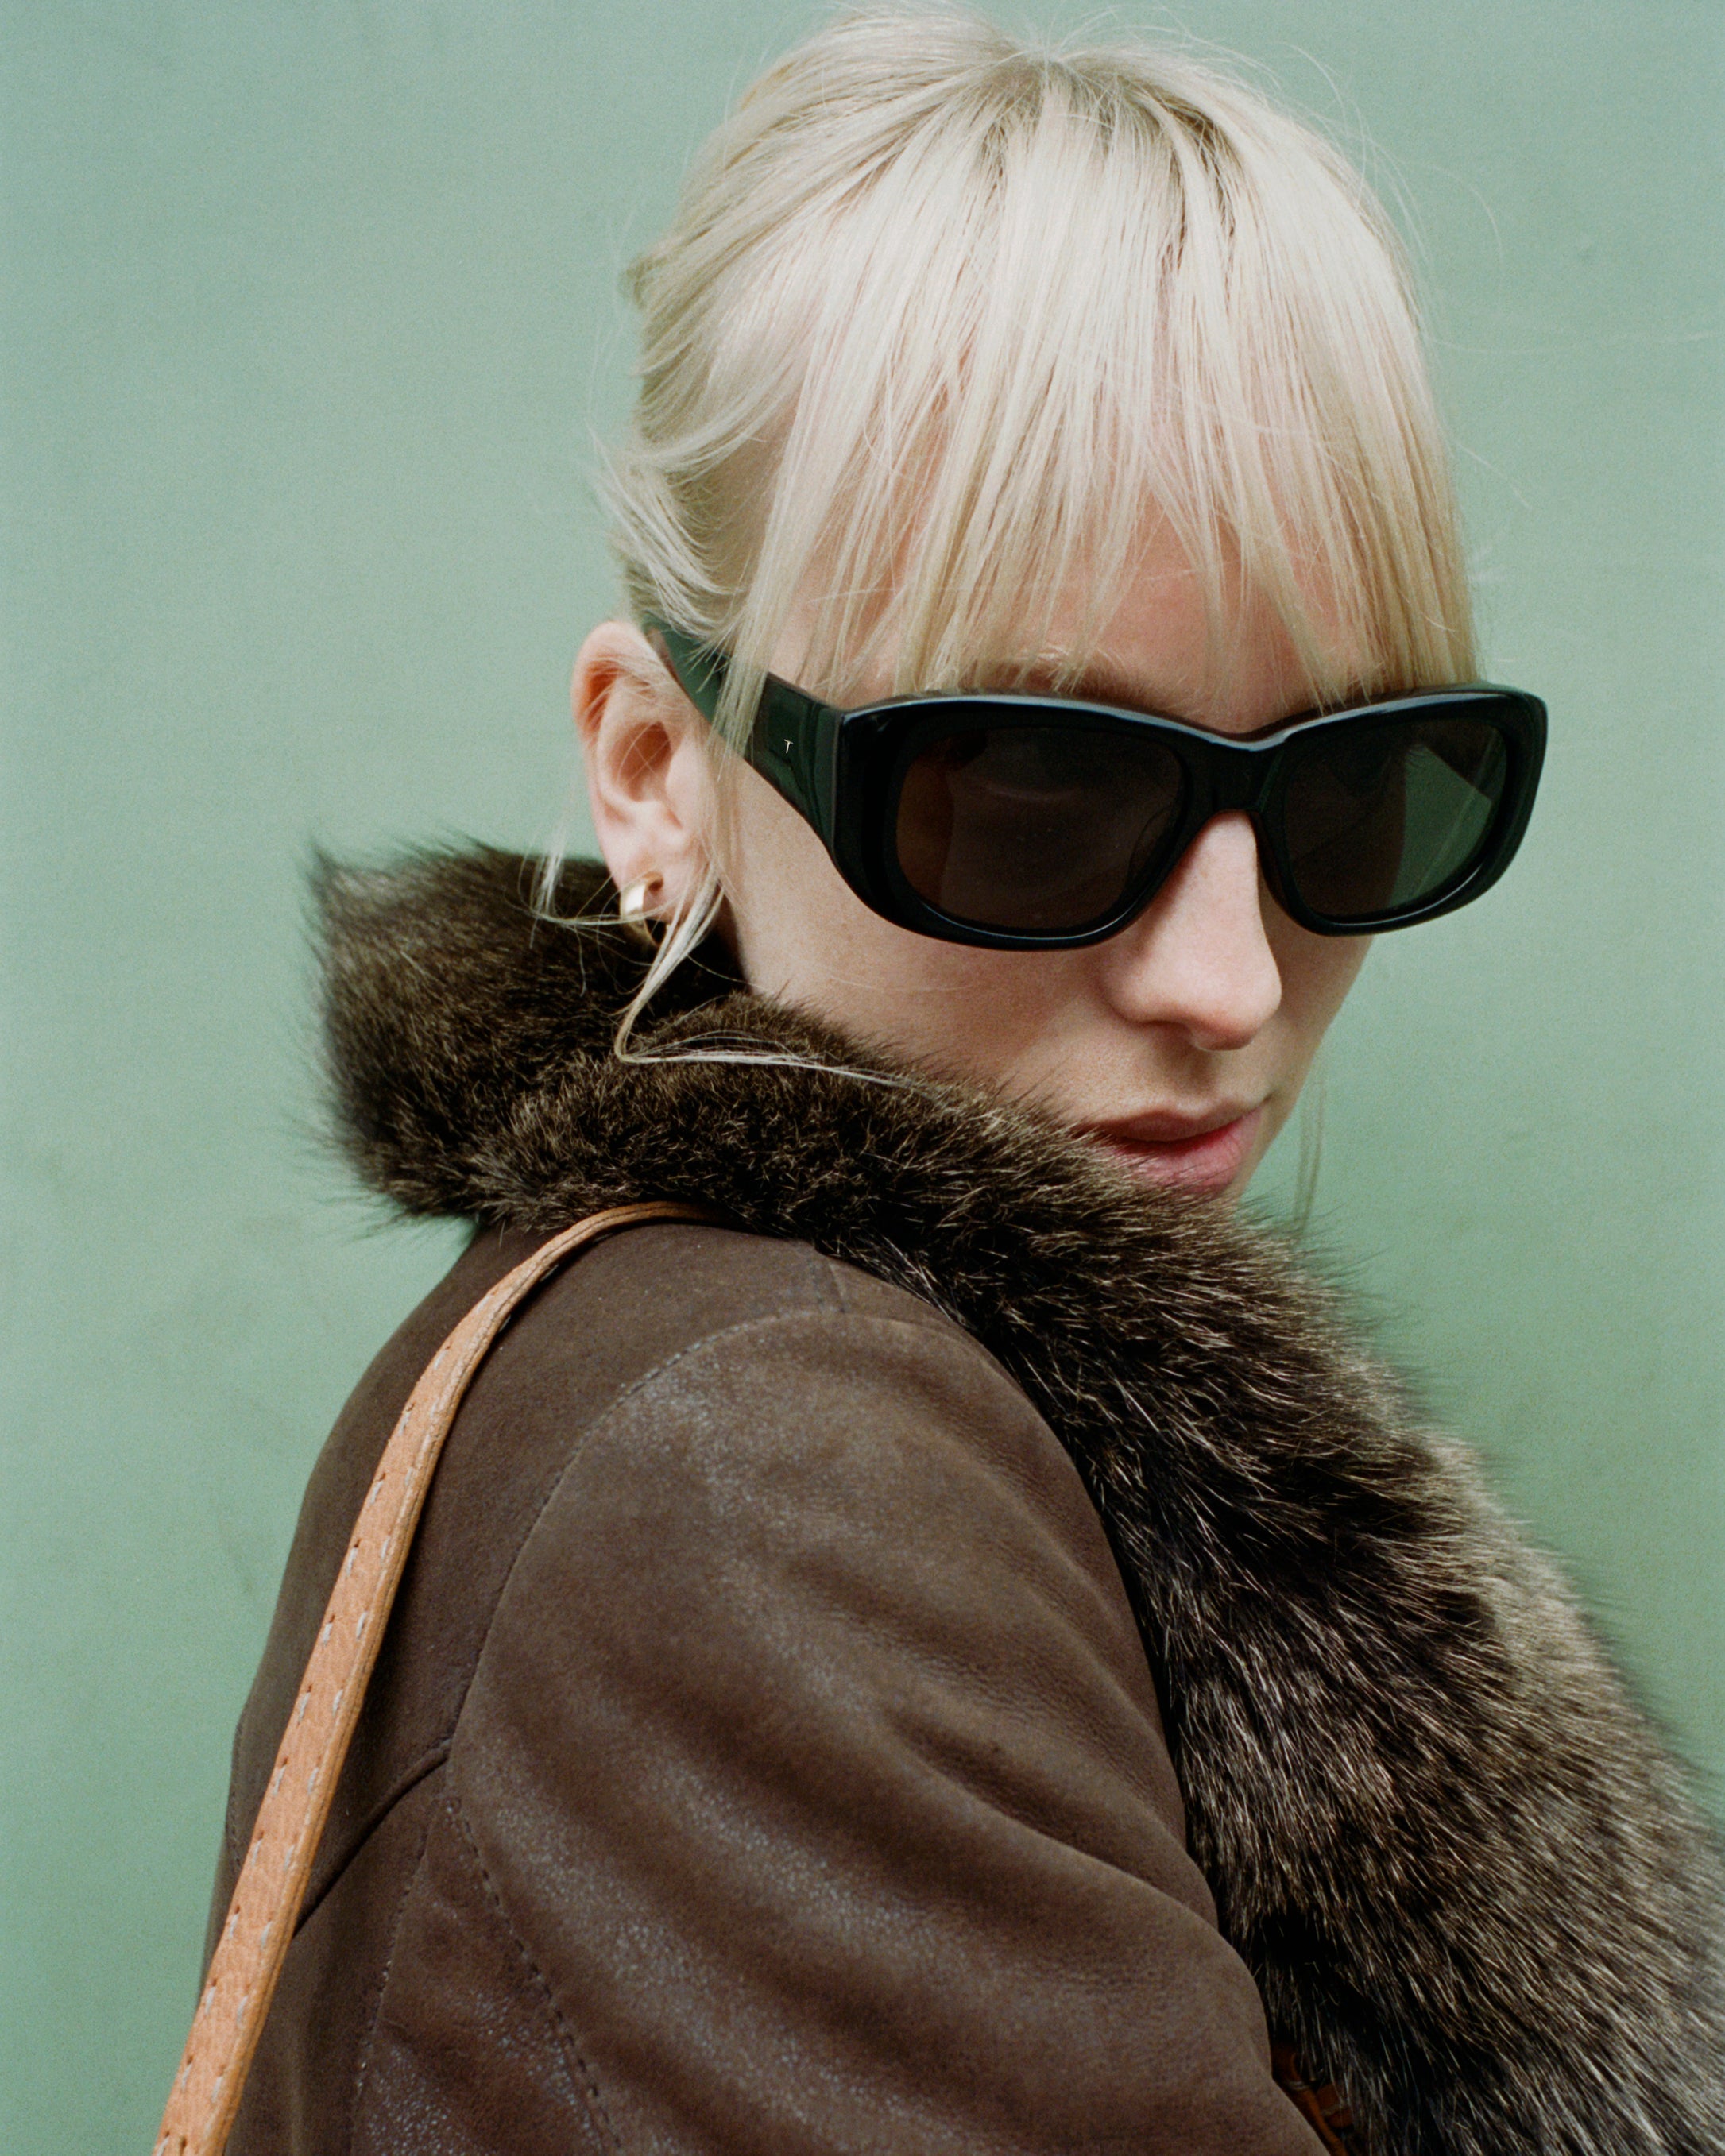 a model looking over her shoulder. she is standing in front of a sage green wall, wearing black sunglasses and a brown fur coat.